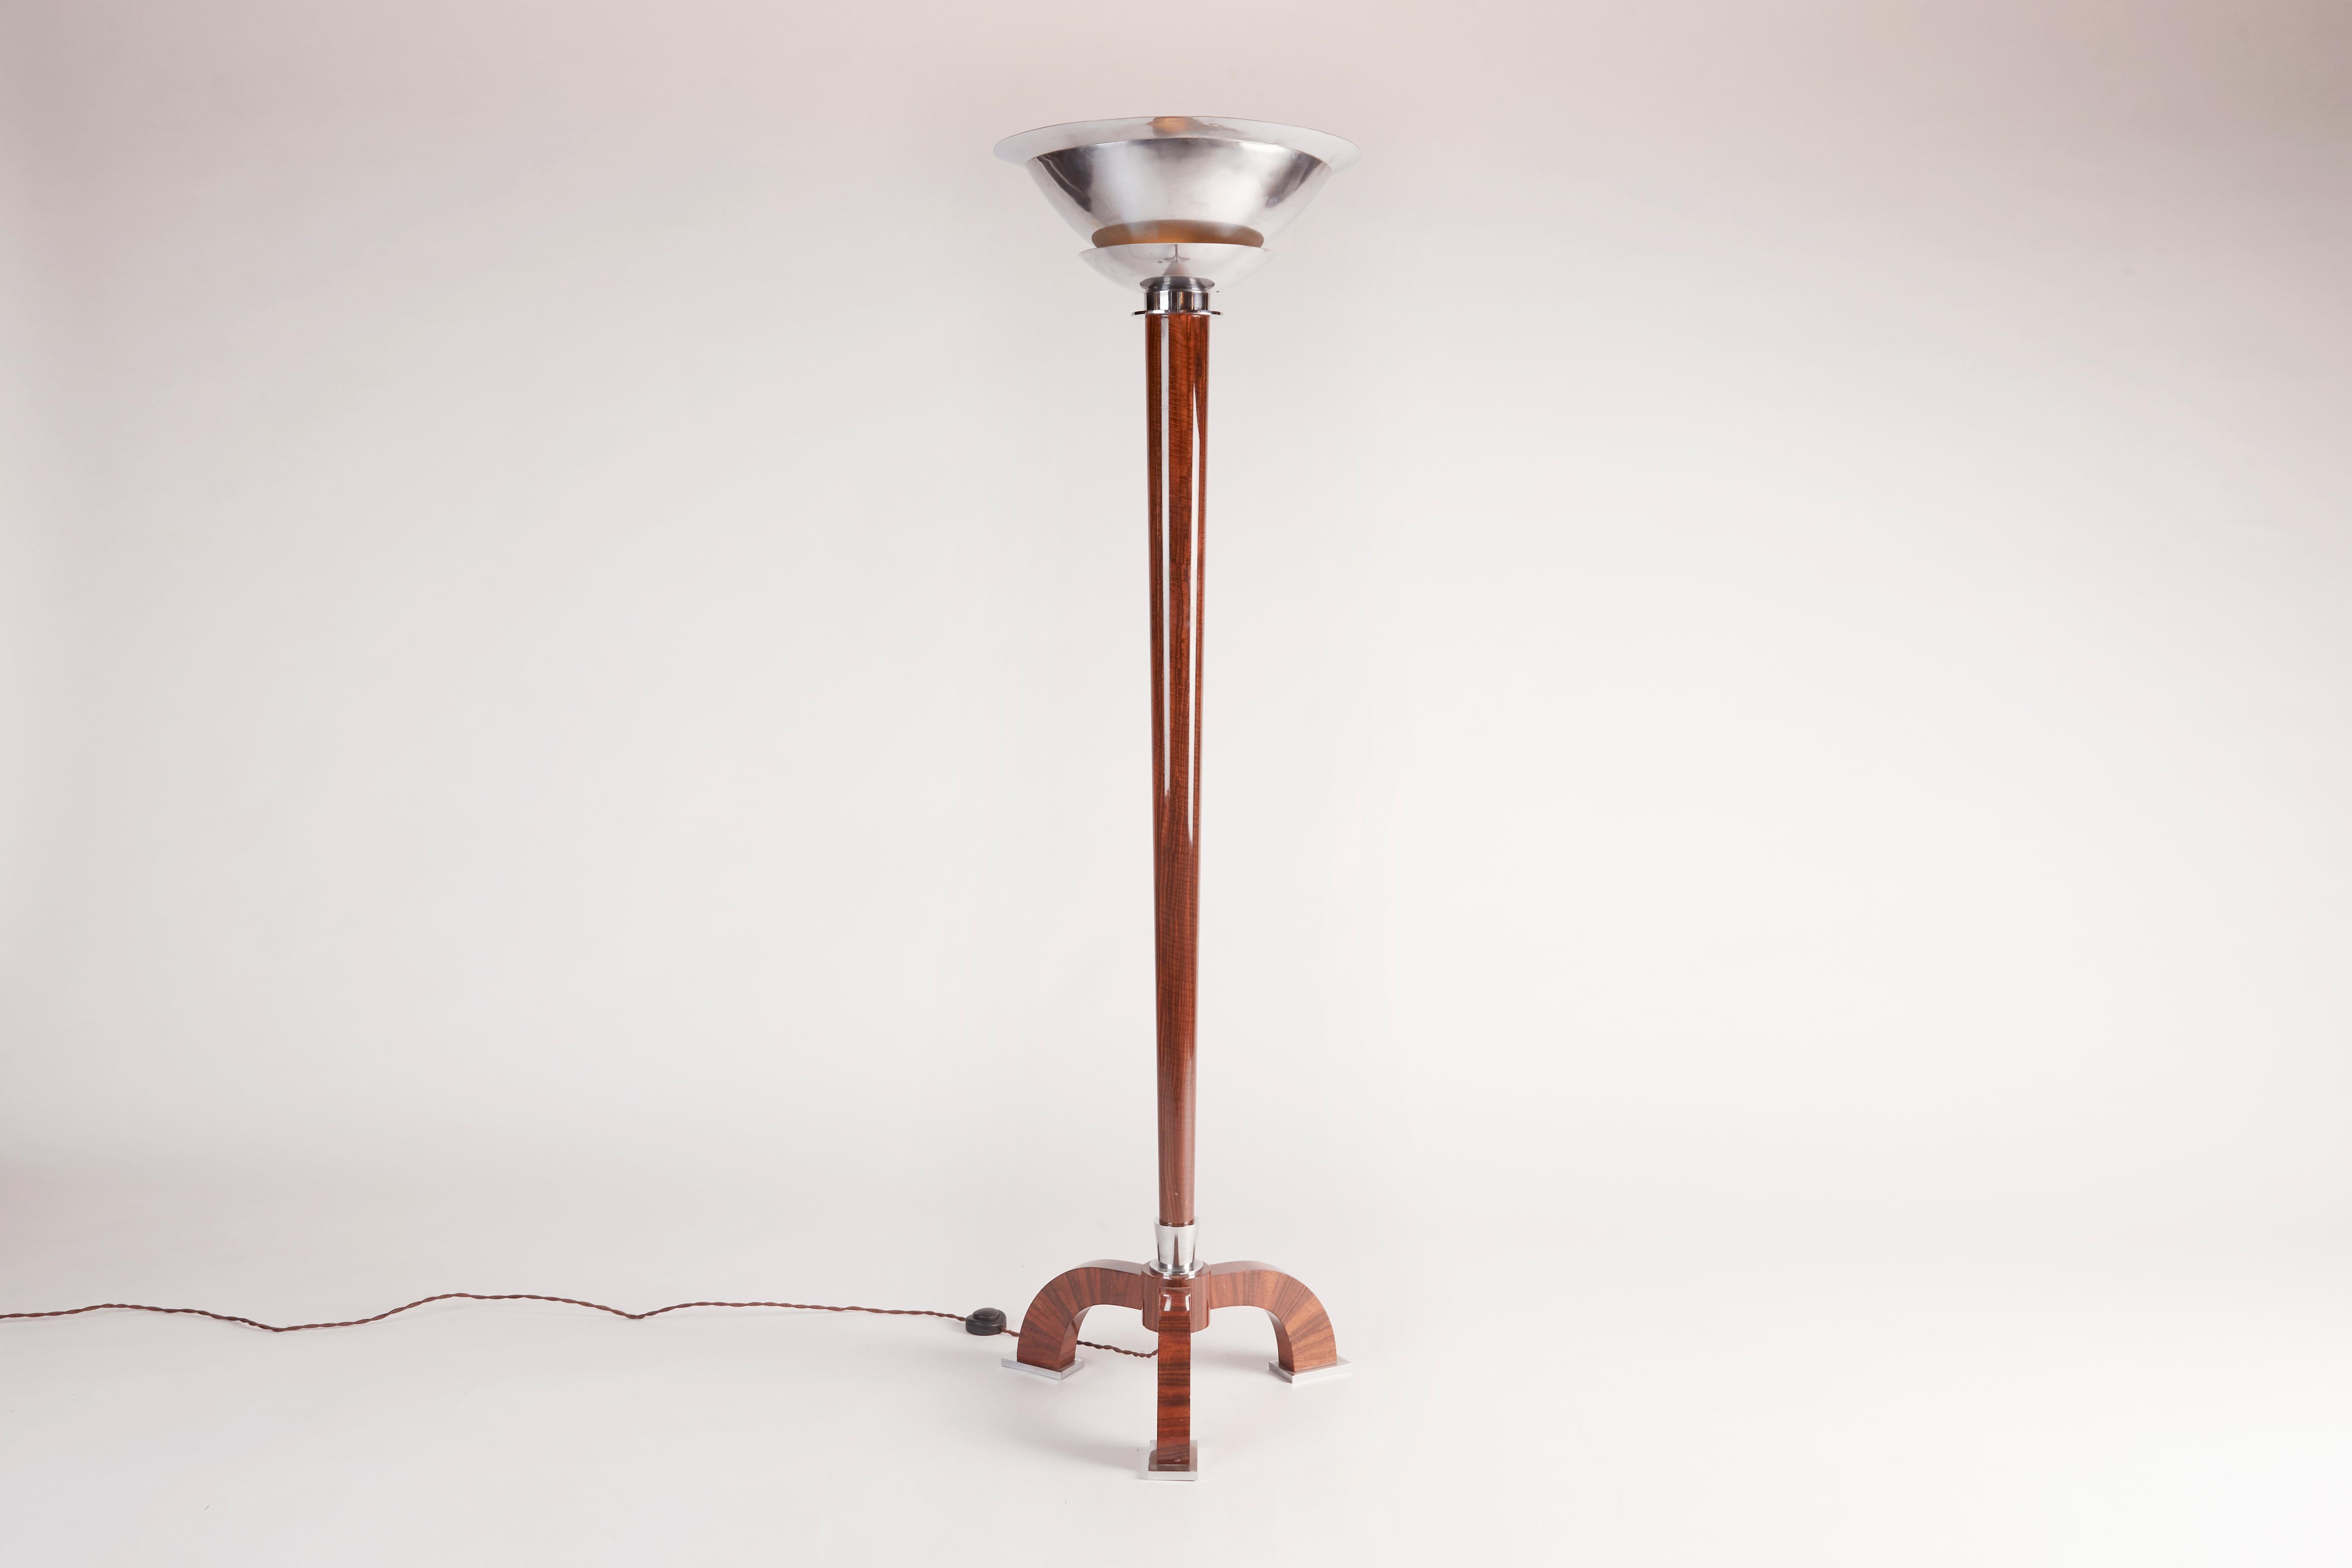 This elegant floor lamp, a design from the early 1930s by Jules Leleu, features a tapered stem in walnut--a long vertical element that unites the complementary shapes of the lamp's playful feet and unusually modern chrome-plated shade.

To our